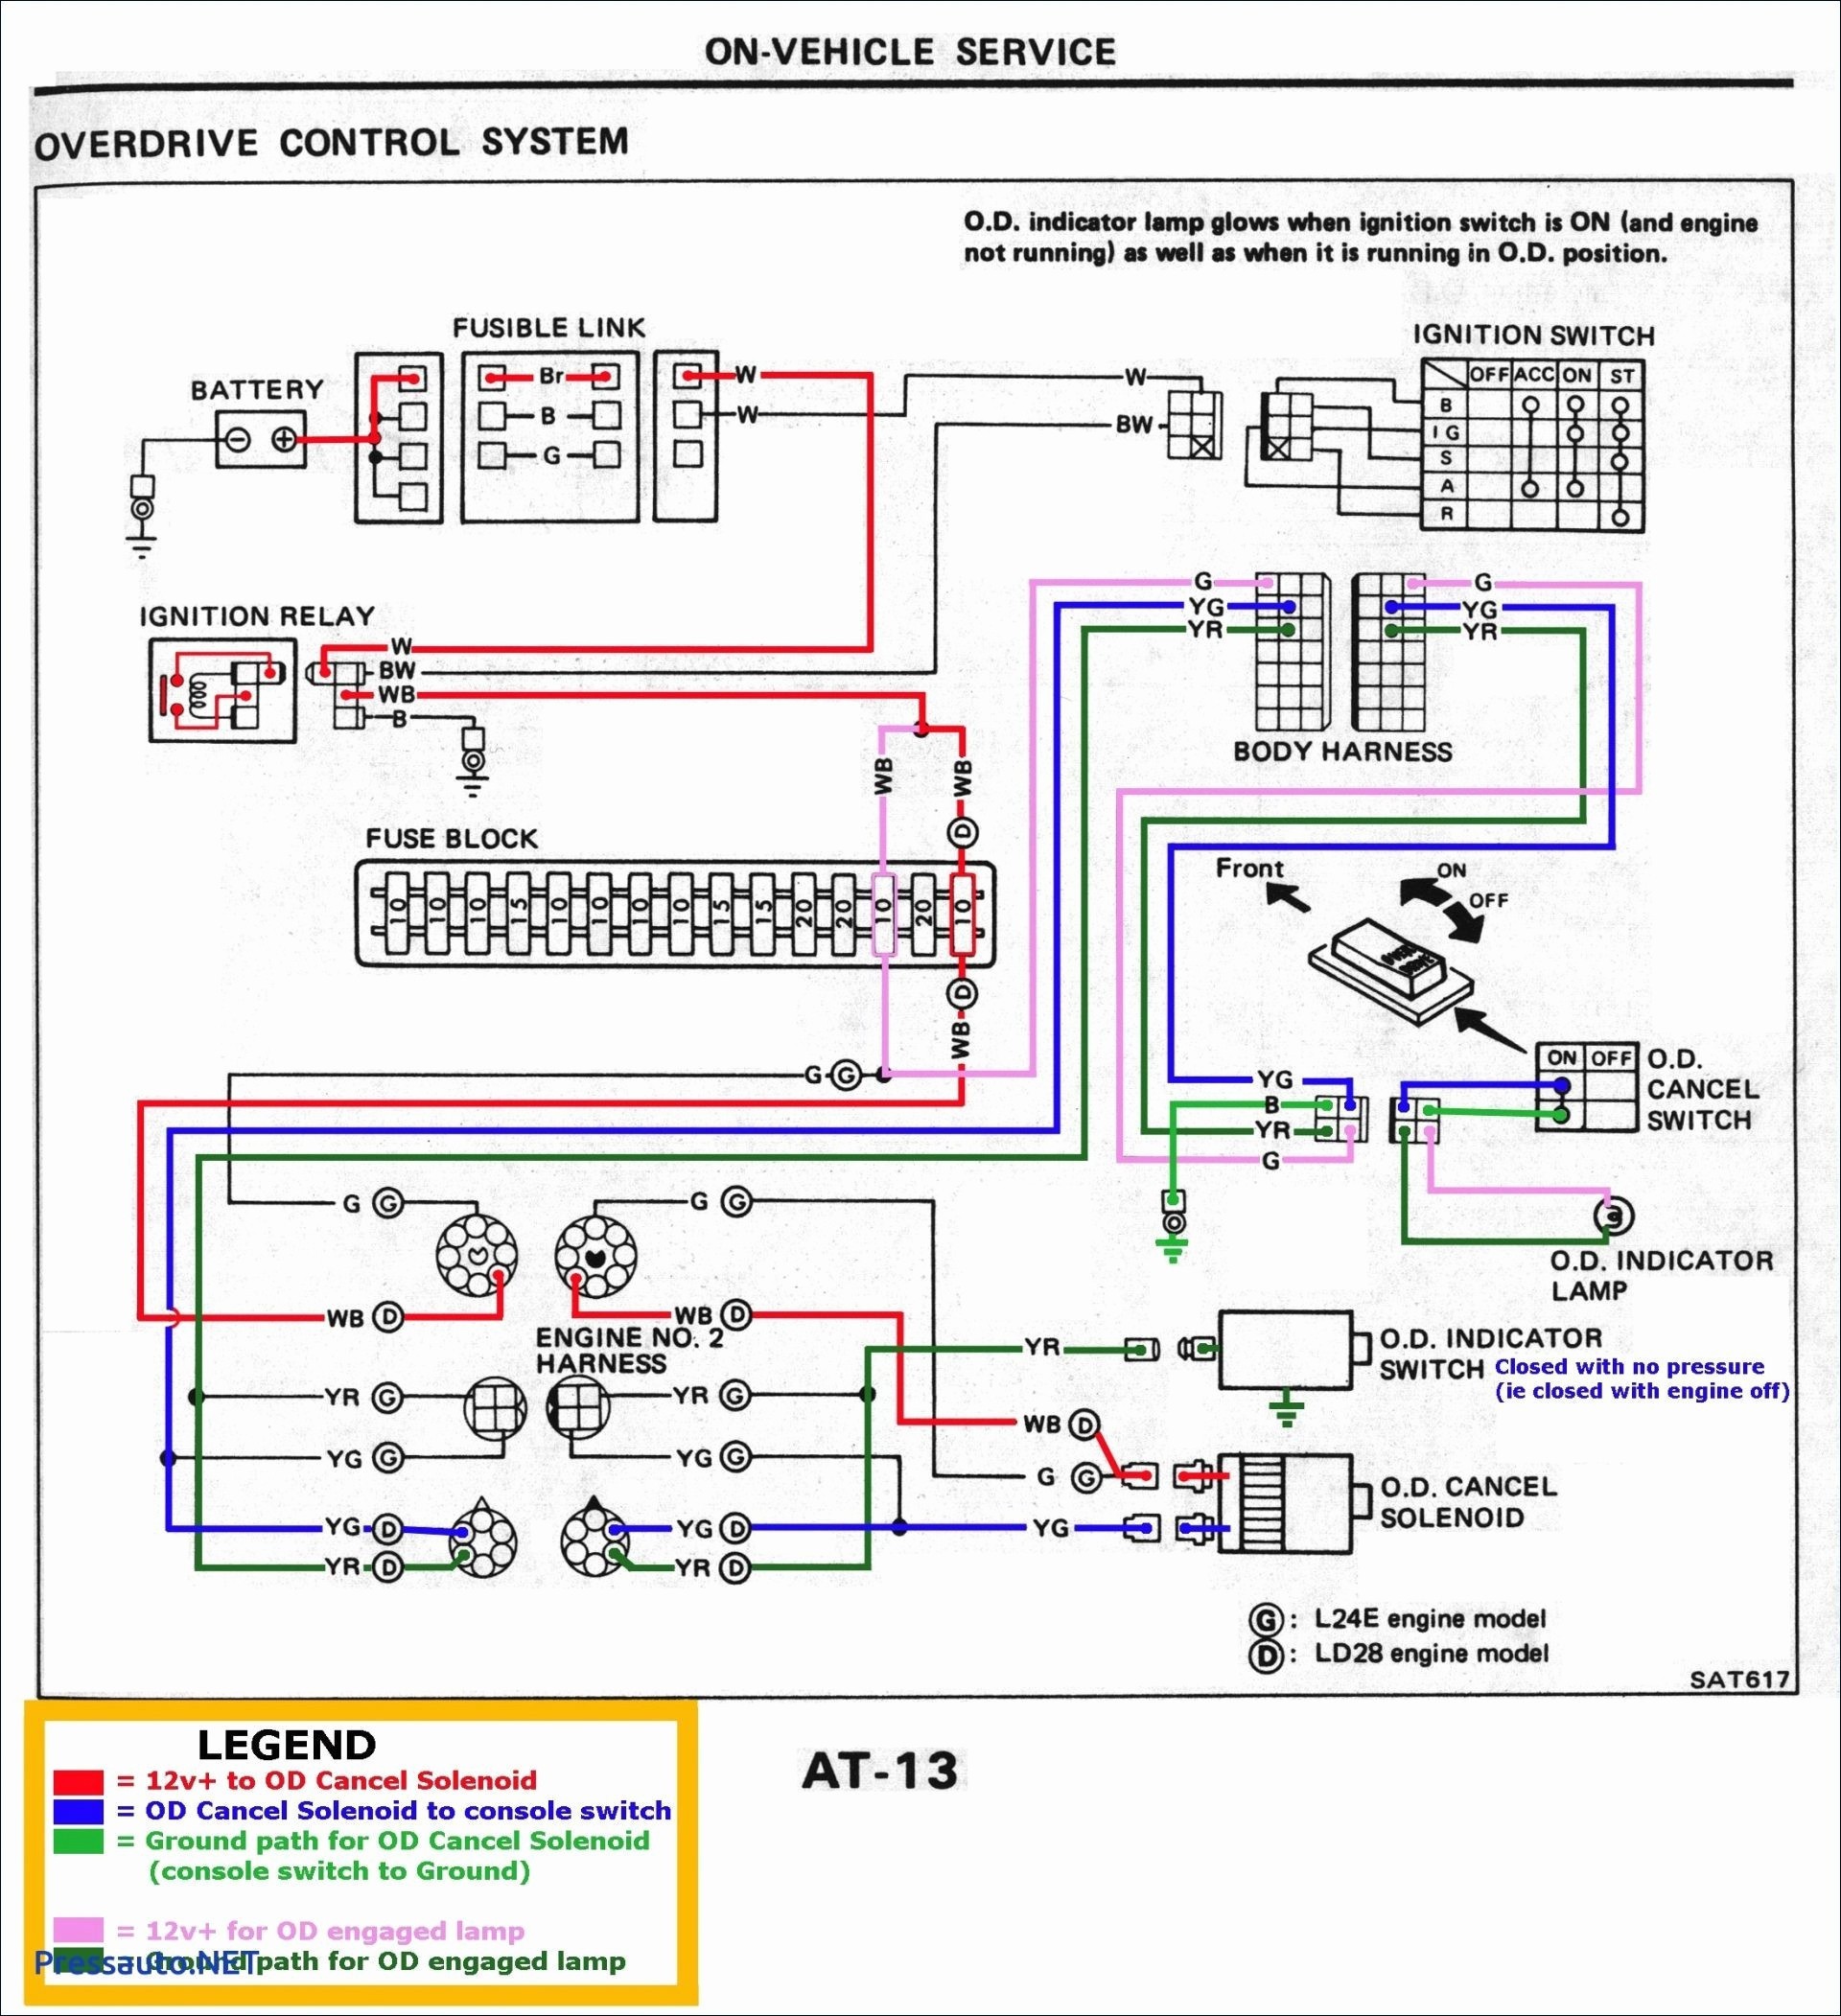 3 Prong Flasher Diagram 00b3f54 Wiring Diagram for Time Delay Relay Of 3 Prong Flasher Diagram